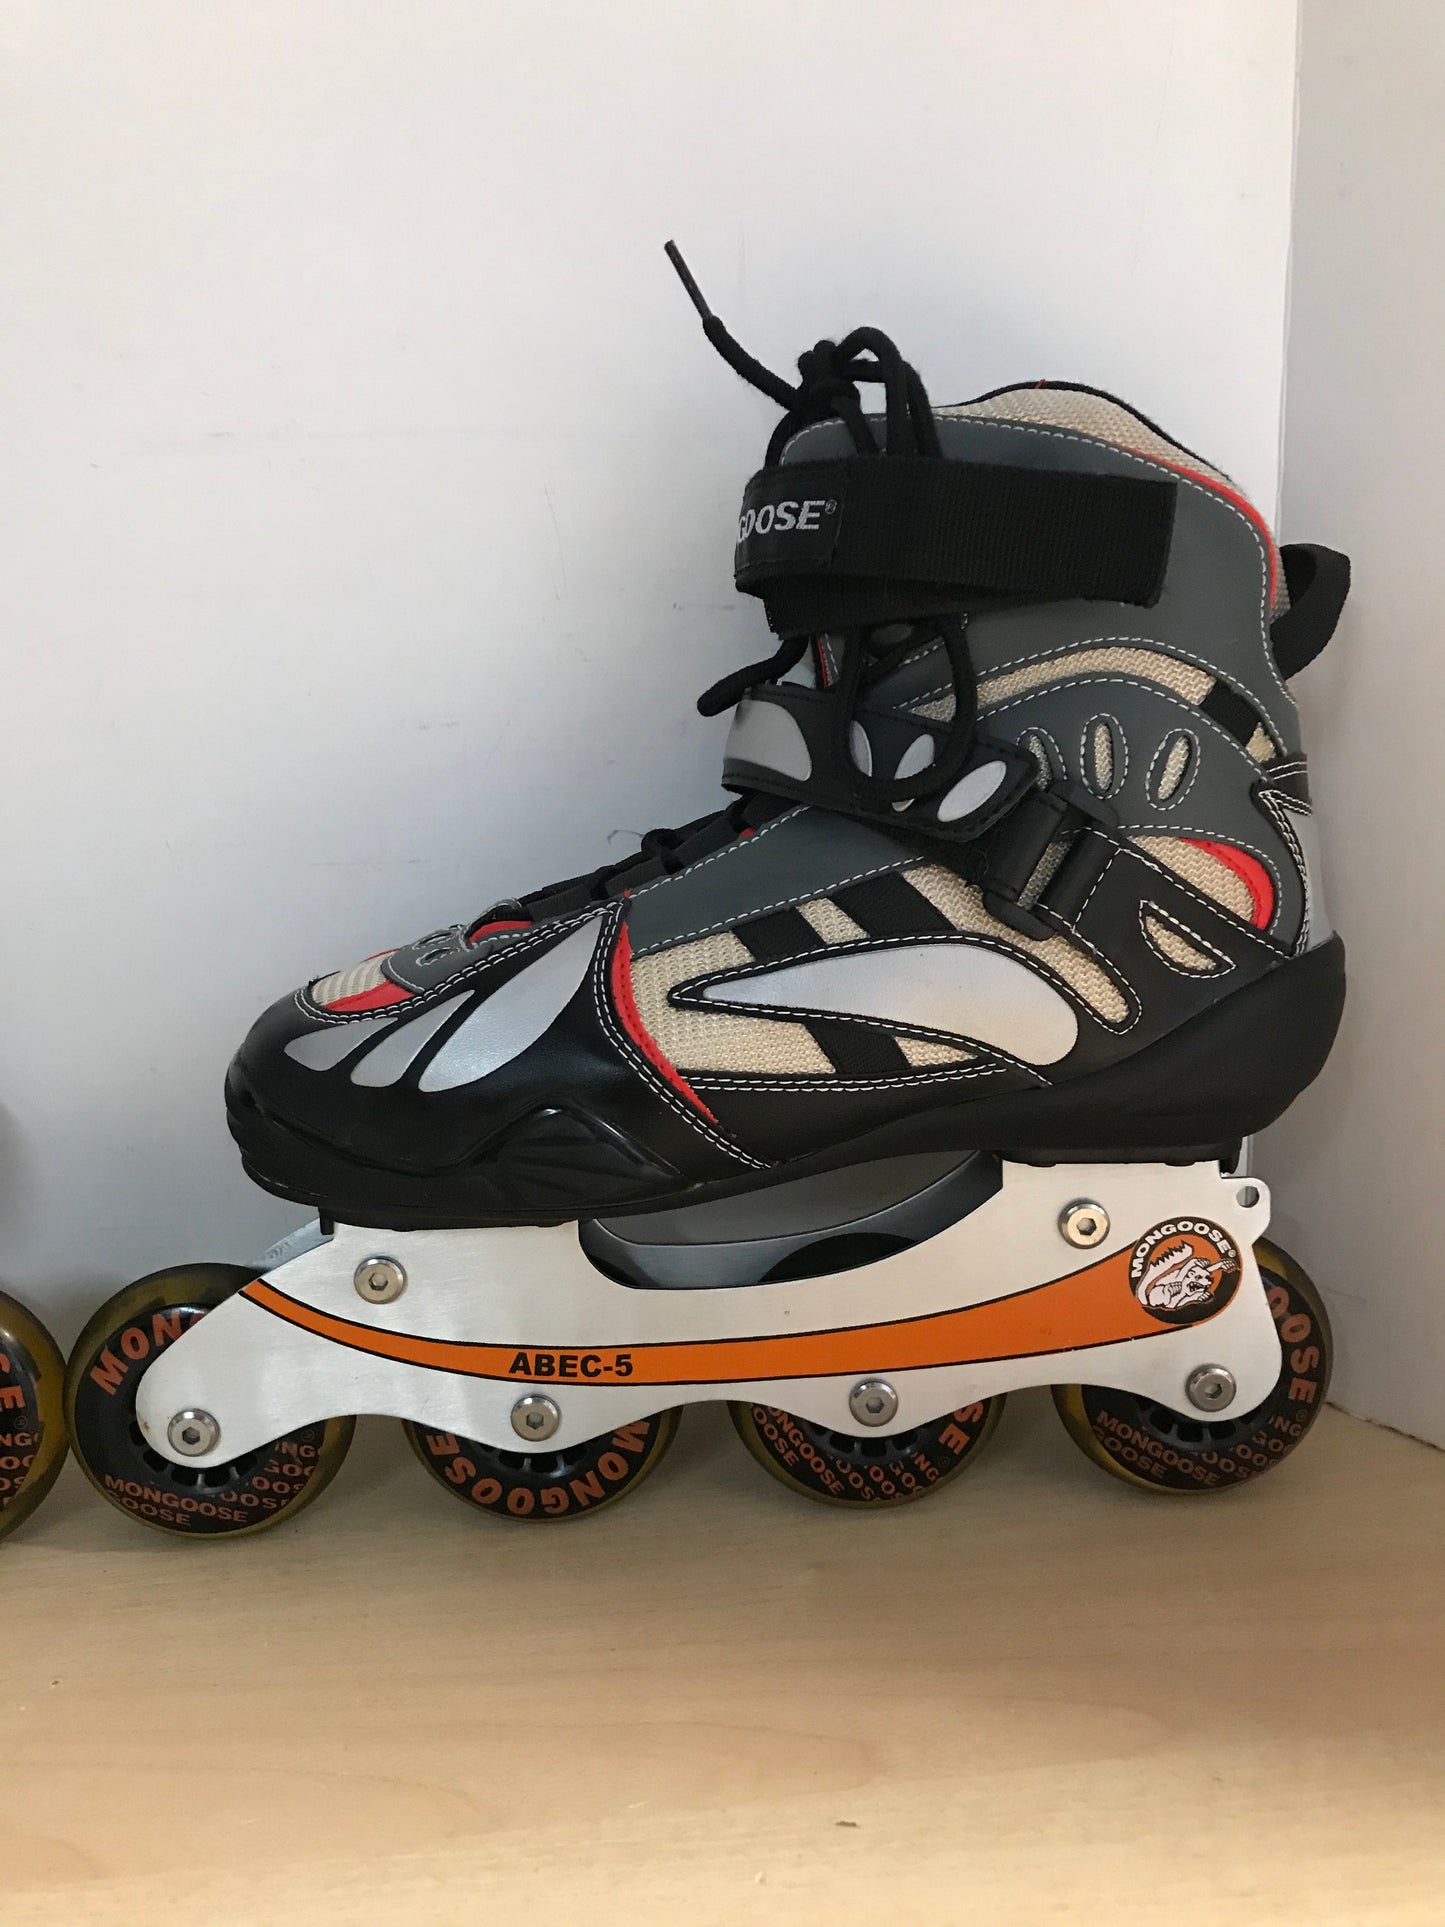 Inline Roller Skates Men's Size 7 Mongoose Black Red Grey With Rubber Wheels Excellent